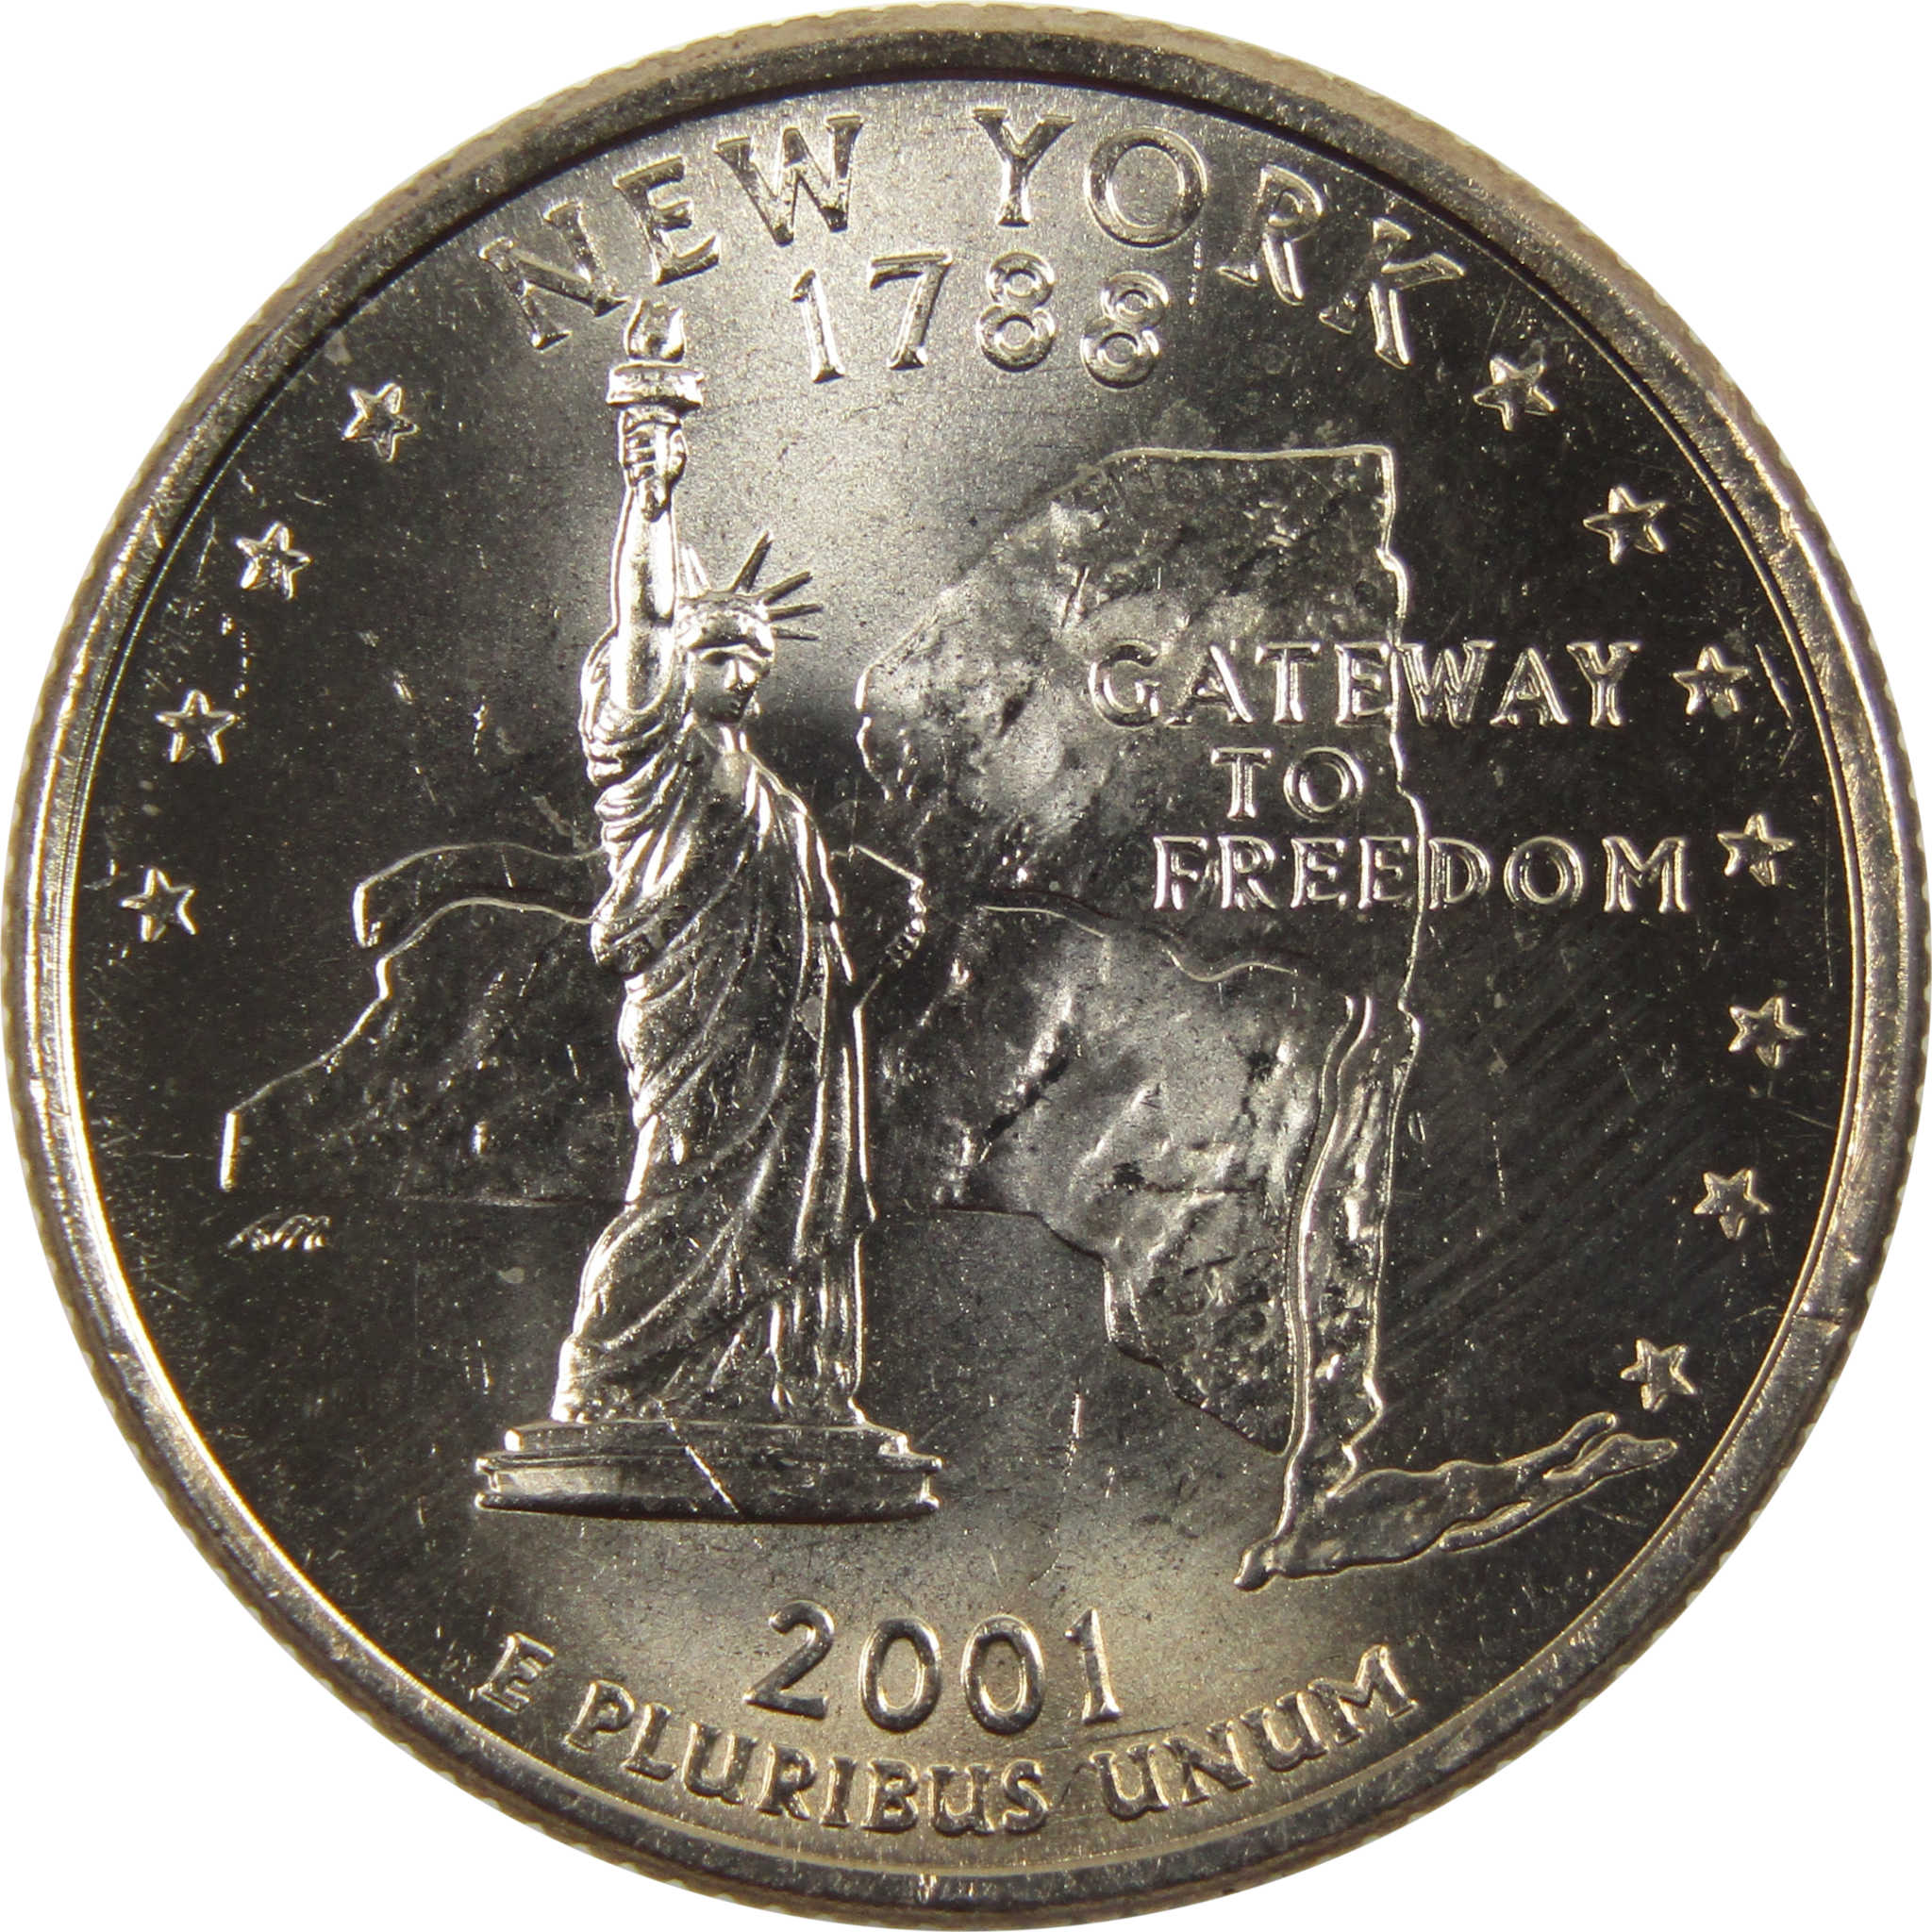 2001 P New York State Quarter BU Uncirculated Clad 25c Coin